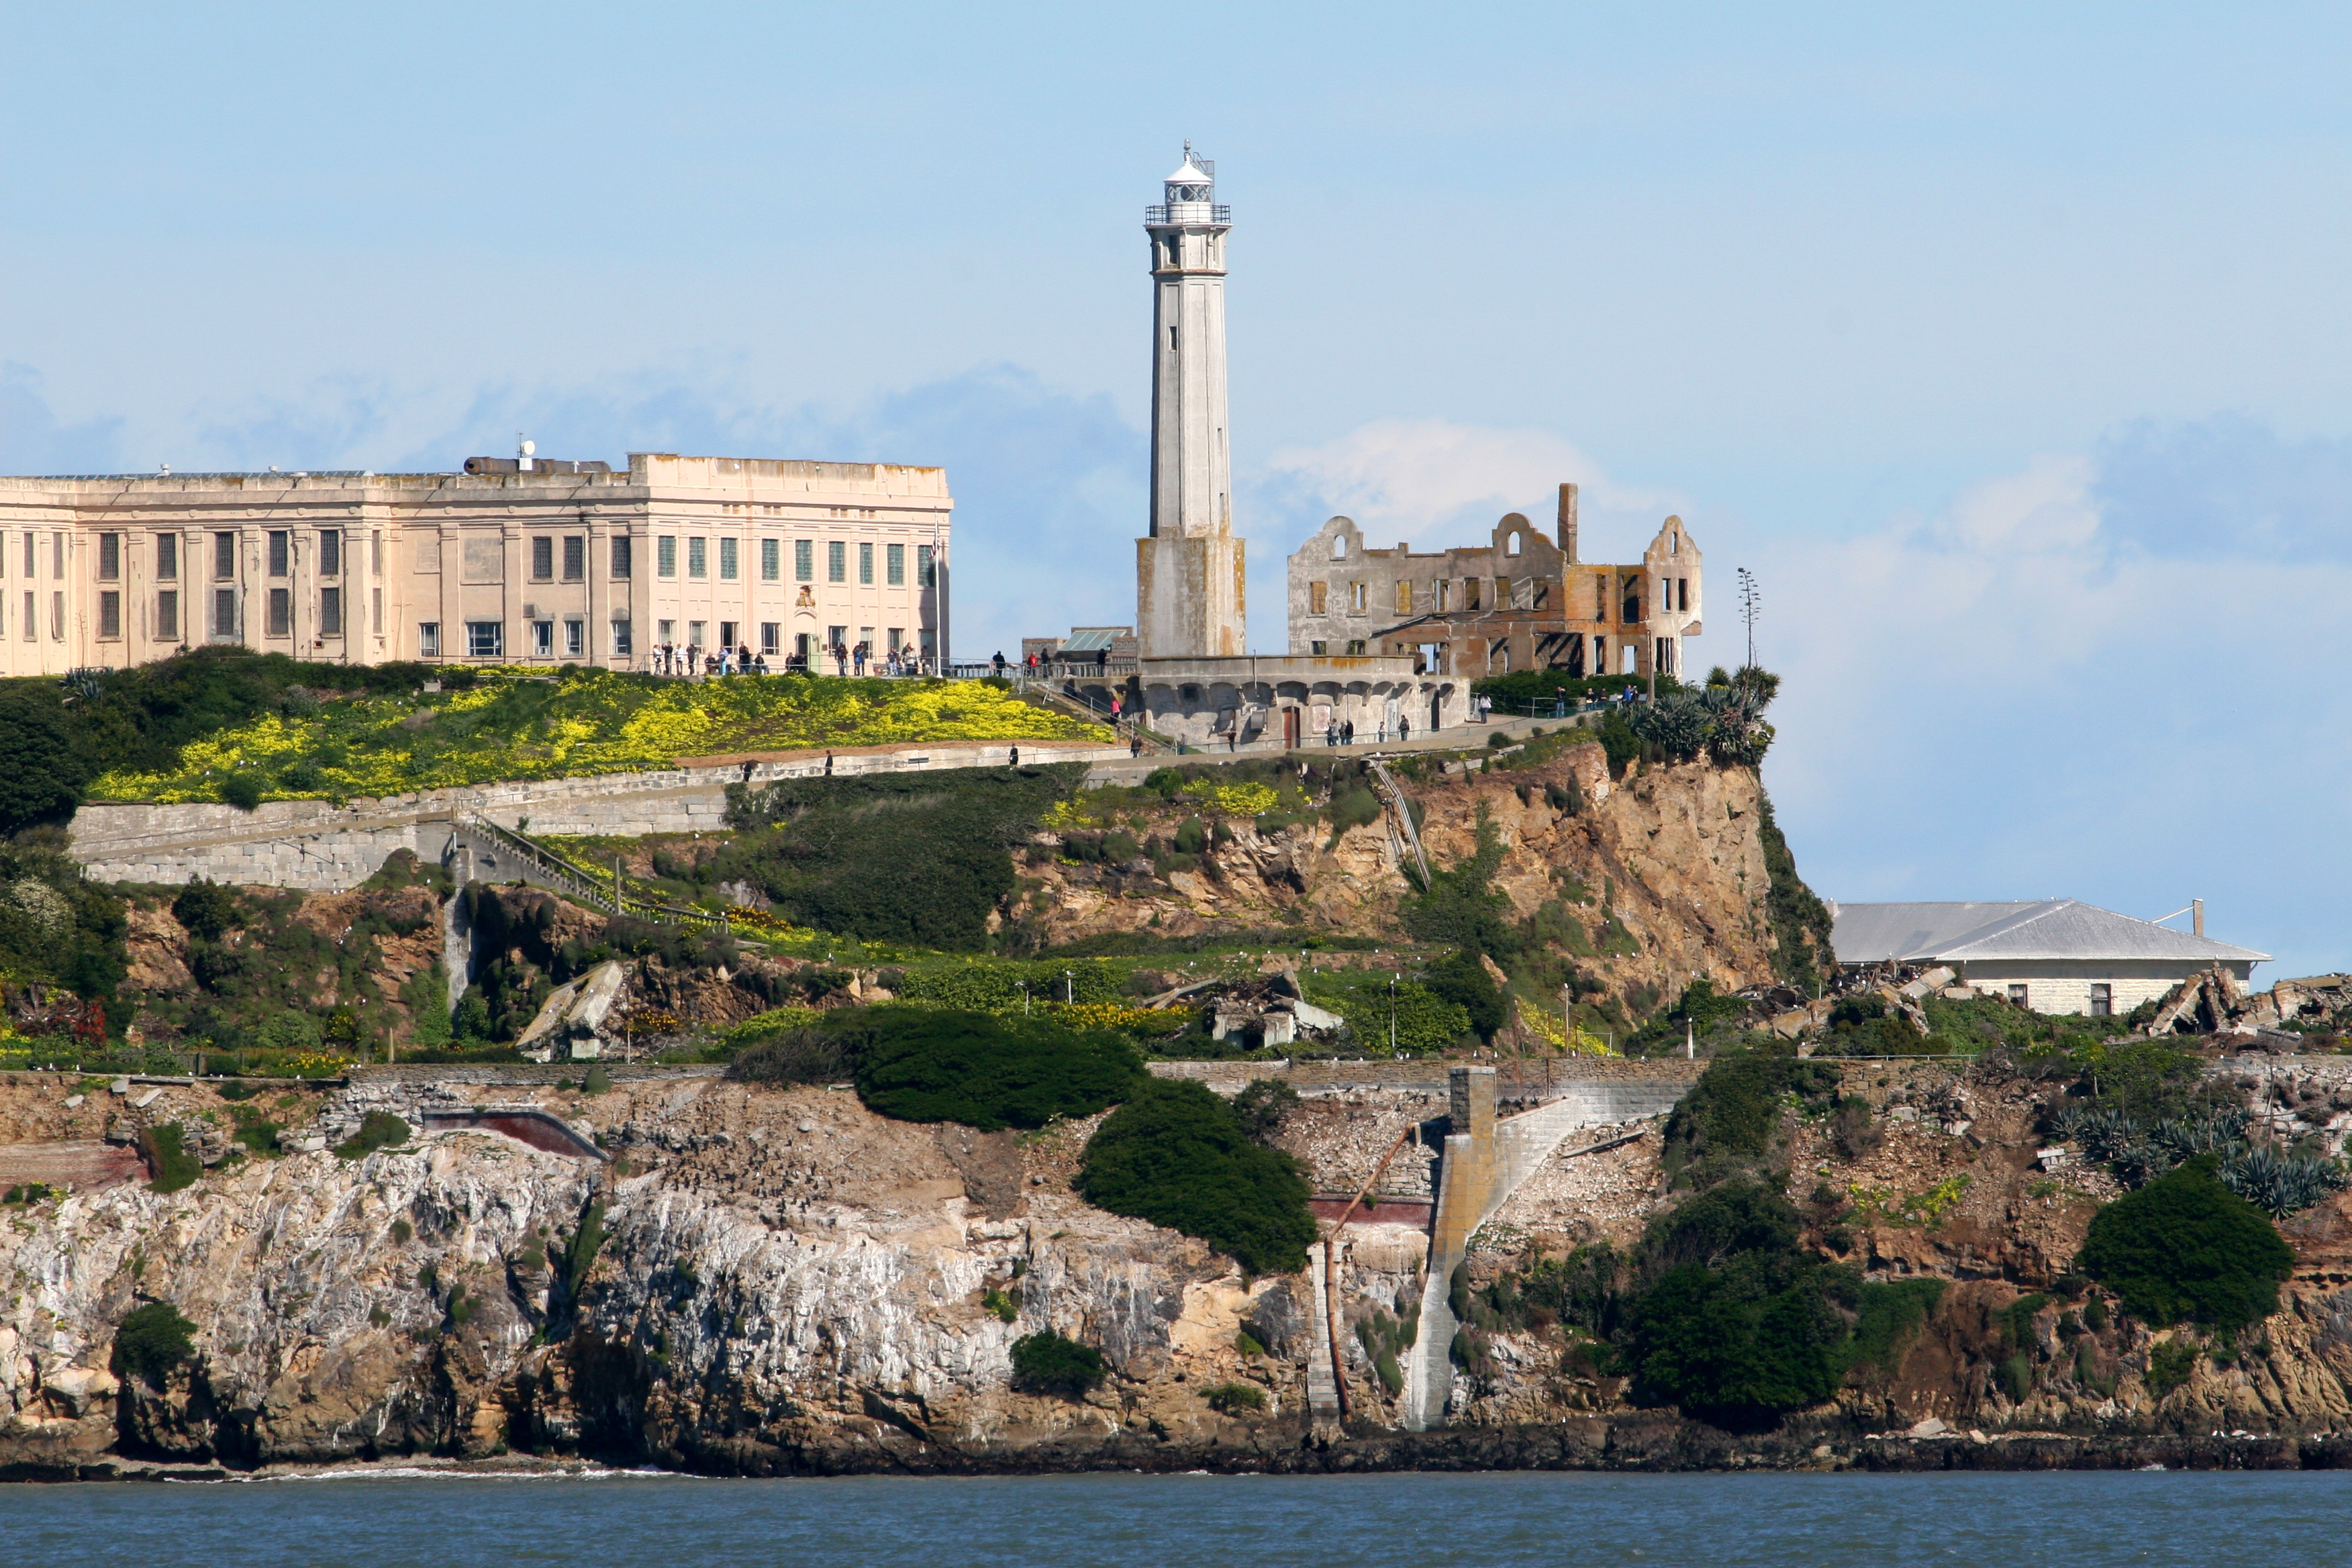 Closeup shot of Alcatraz Island showing lighthouse and prison with yellow flowers on slope in front.